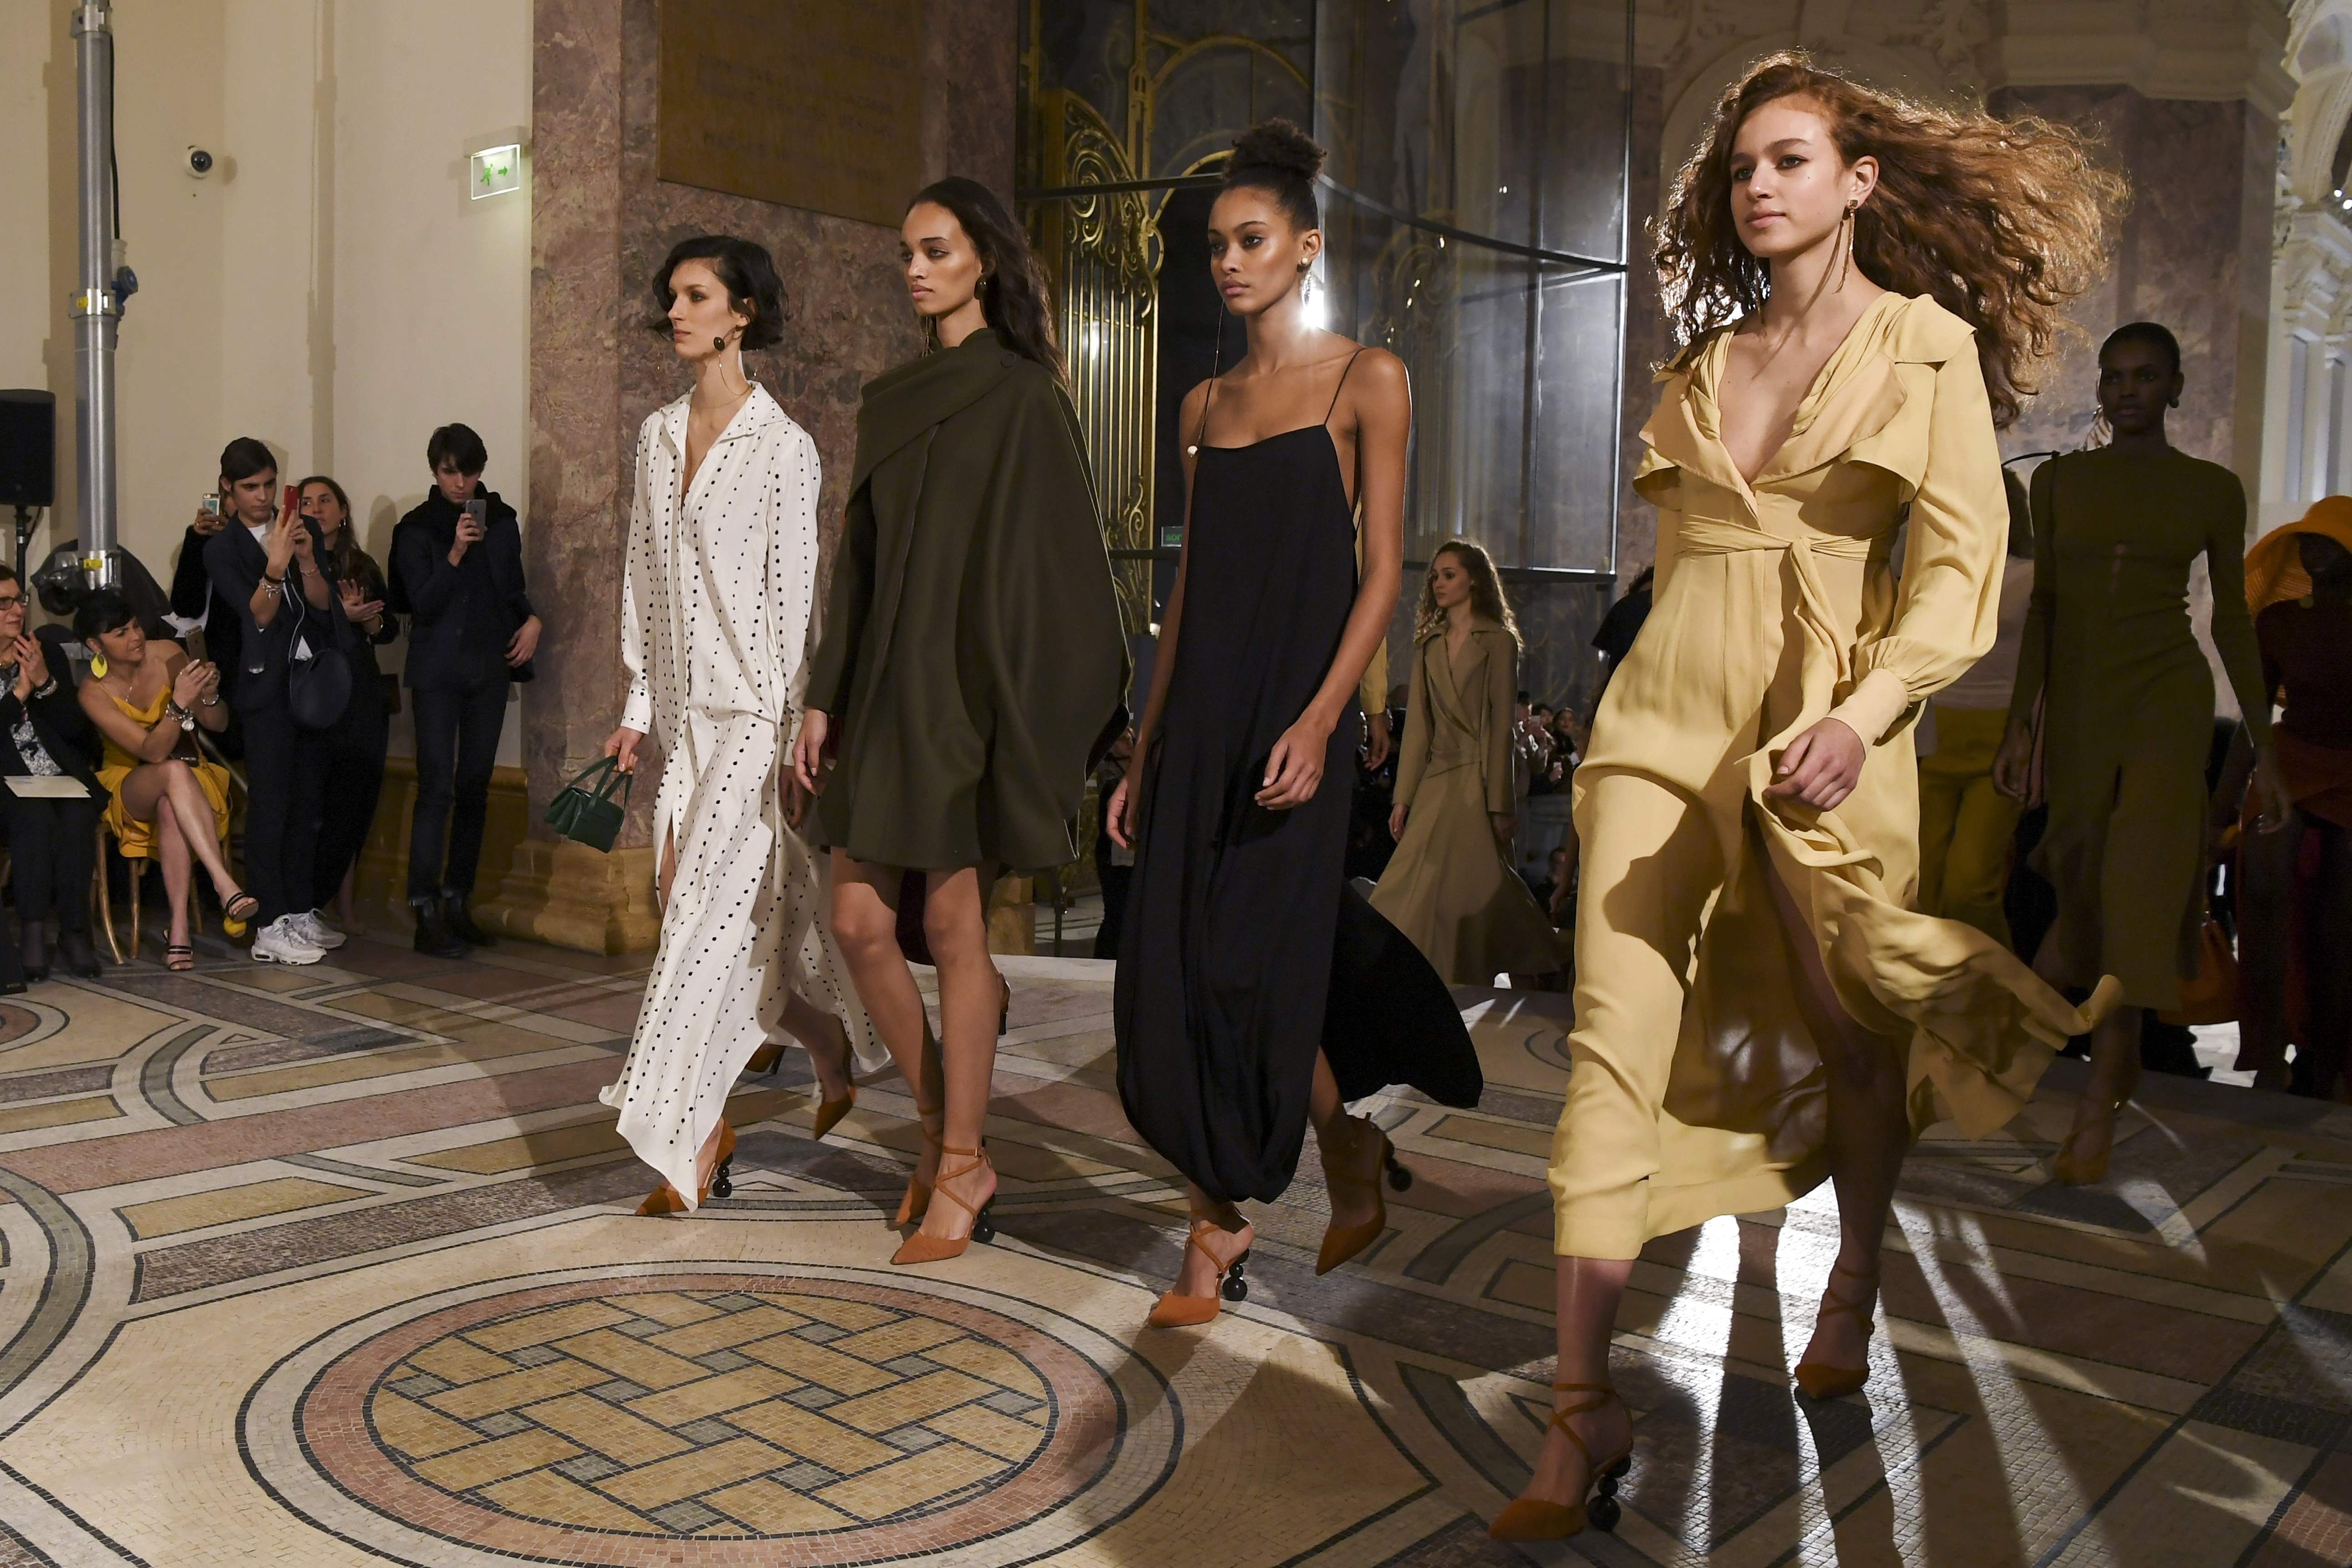 Common elements seen on the catwalk include feminist ideas, scarfs trailing from the forehead, exaggerated hip shapes, and yellow and gold tones